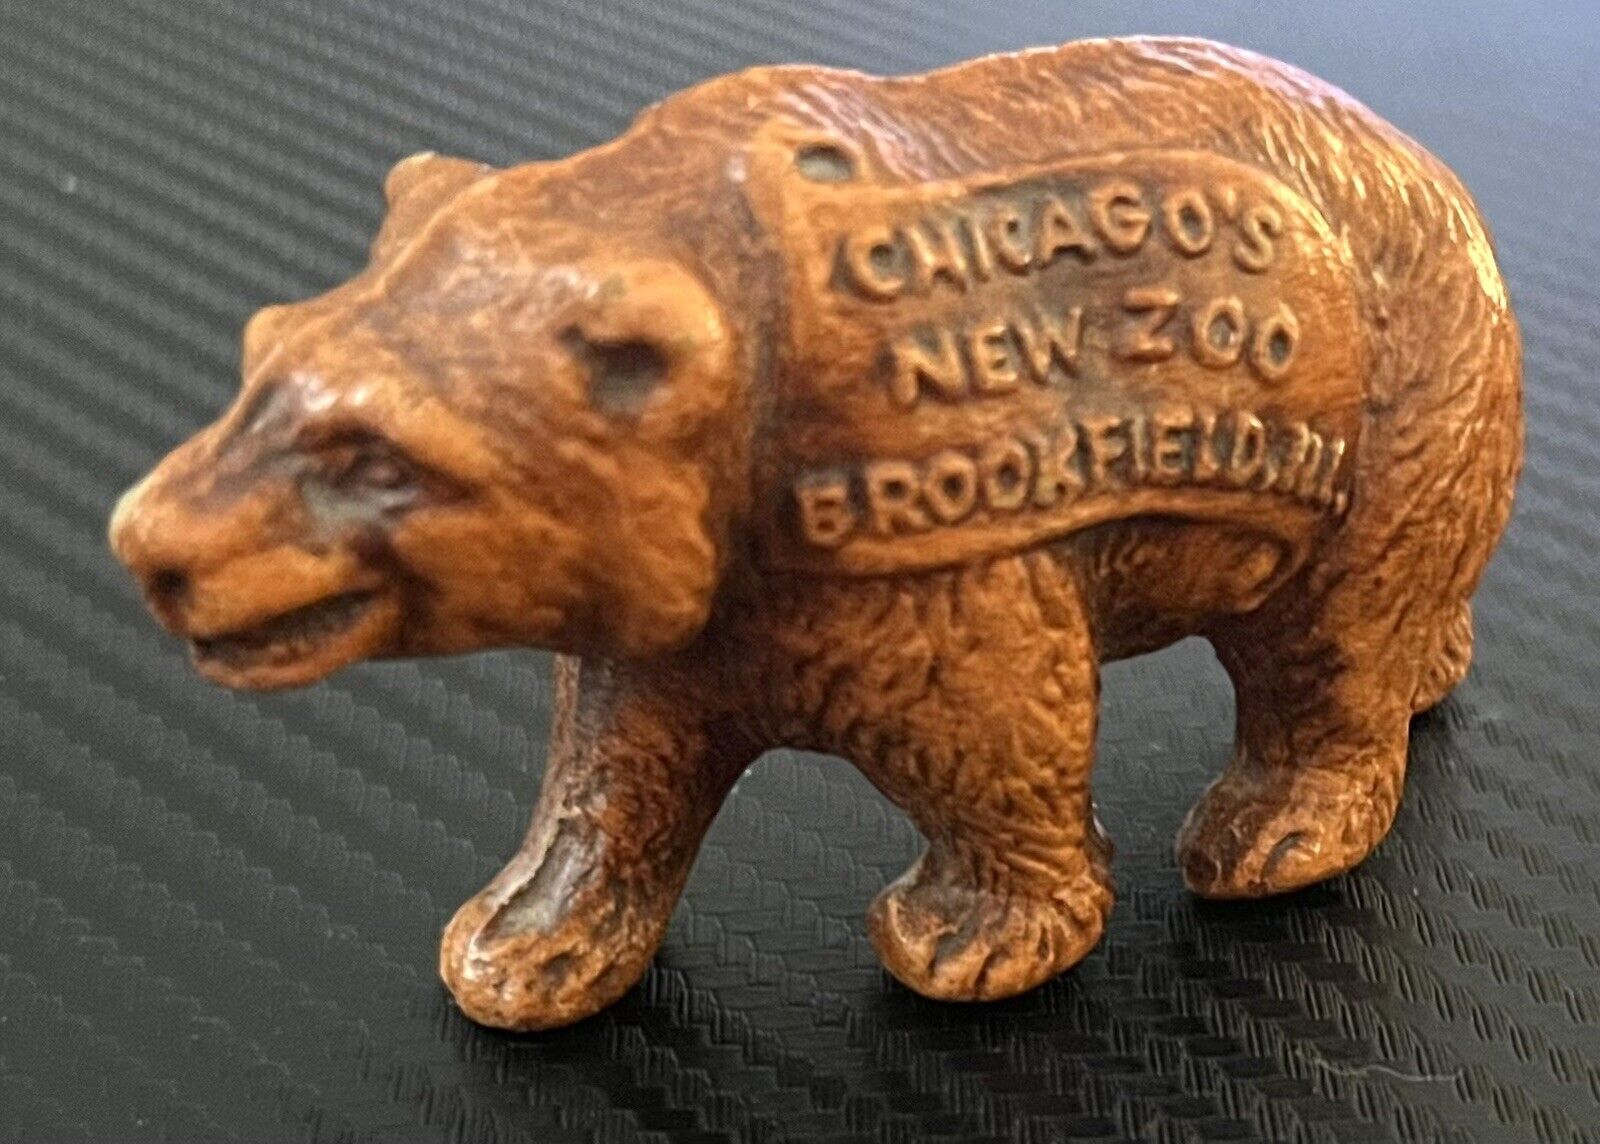 Vintage 1930s Chicago’s New Zoo Brookfield, Illinois Small 3” Bear Figurine Toy